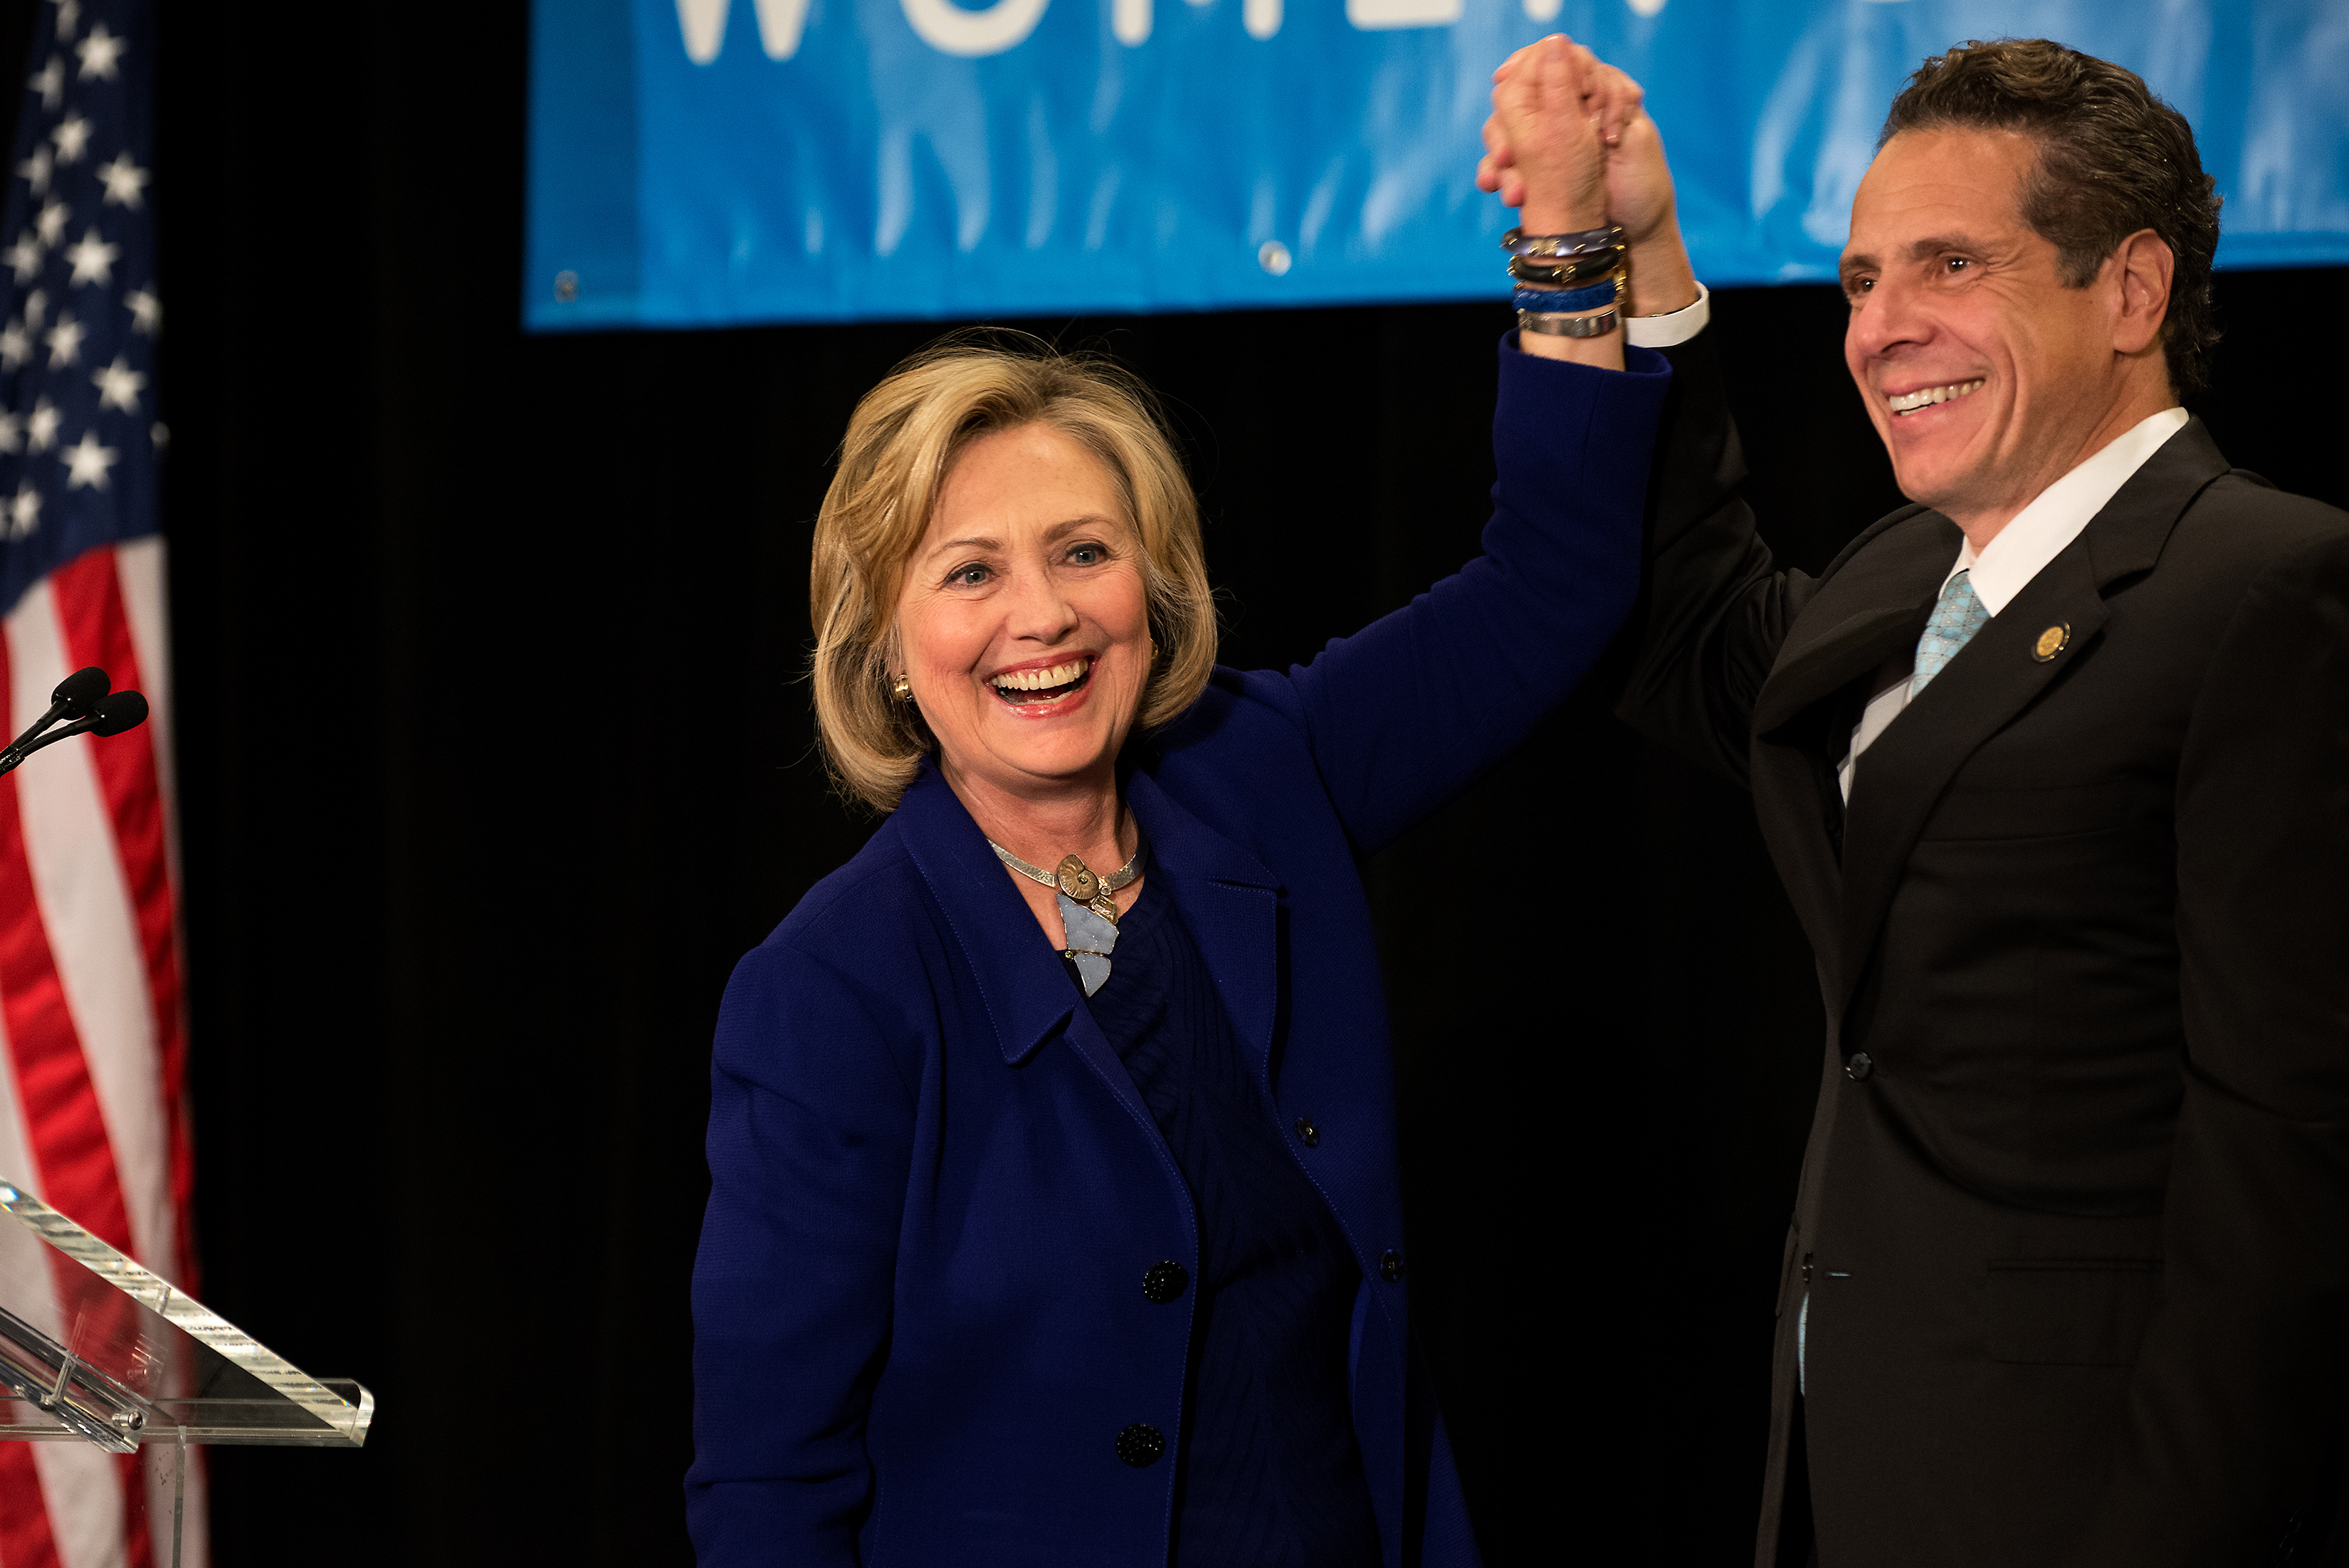 Former U.S. Secretary of State and U.S. Sen. Hillary Rodham Clinton raises the hand of New York Gov. Andrew Cuomo at a Cuomo campaign event in 2014. (Photo by Bryan Thomas/Getty Images)